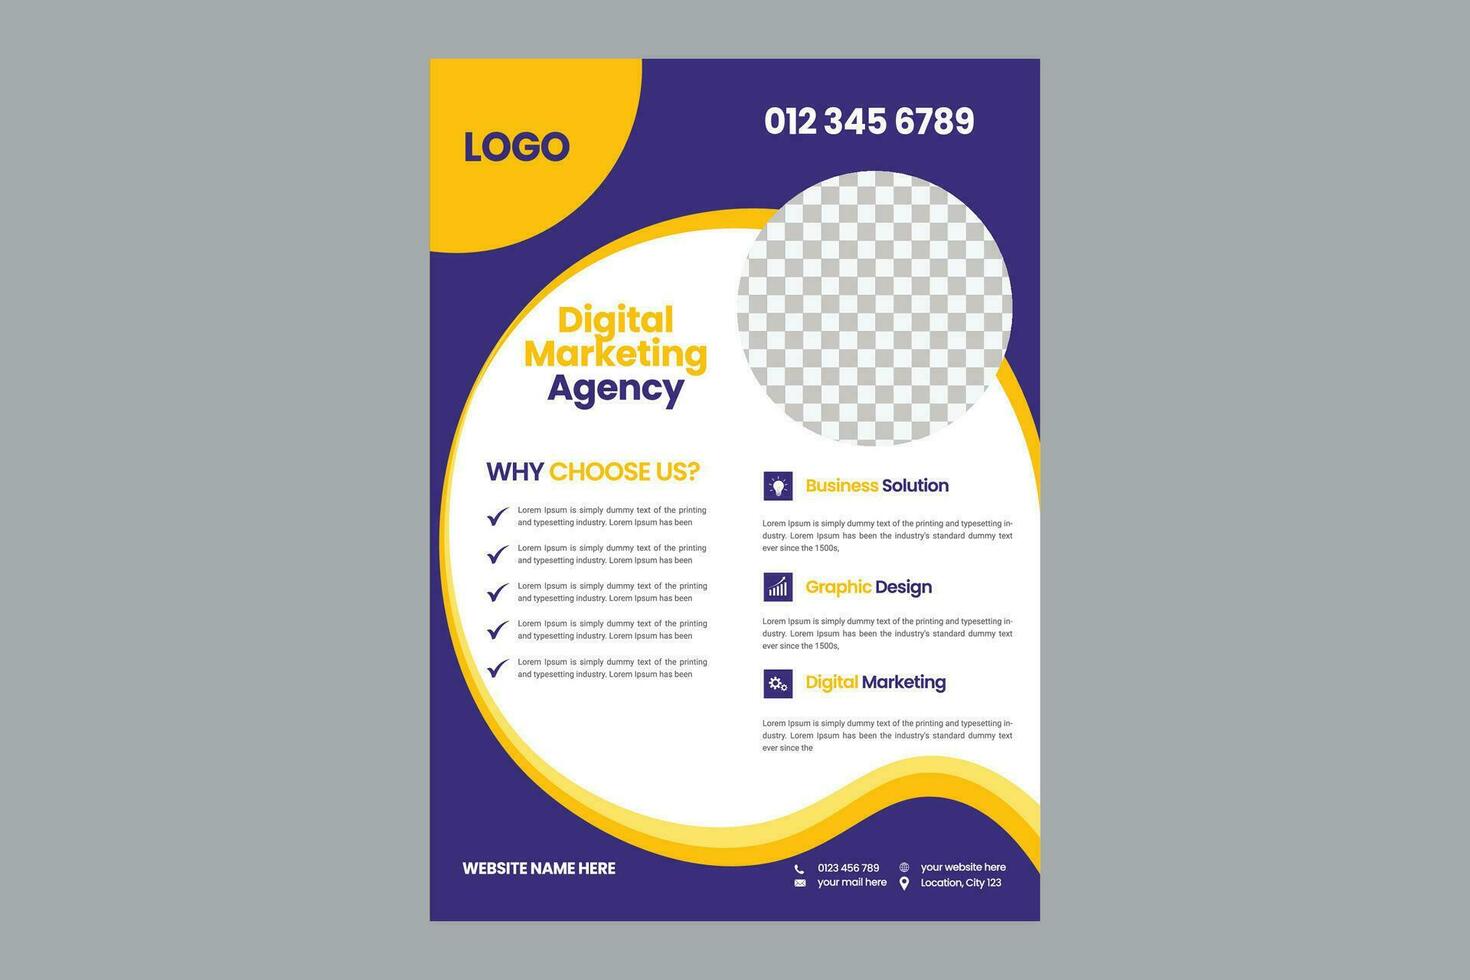 Annual report brochure flyer design template vector, Leaflet, presentation book cover templates, layout in A4 size vector